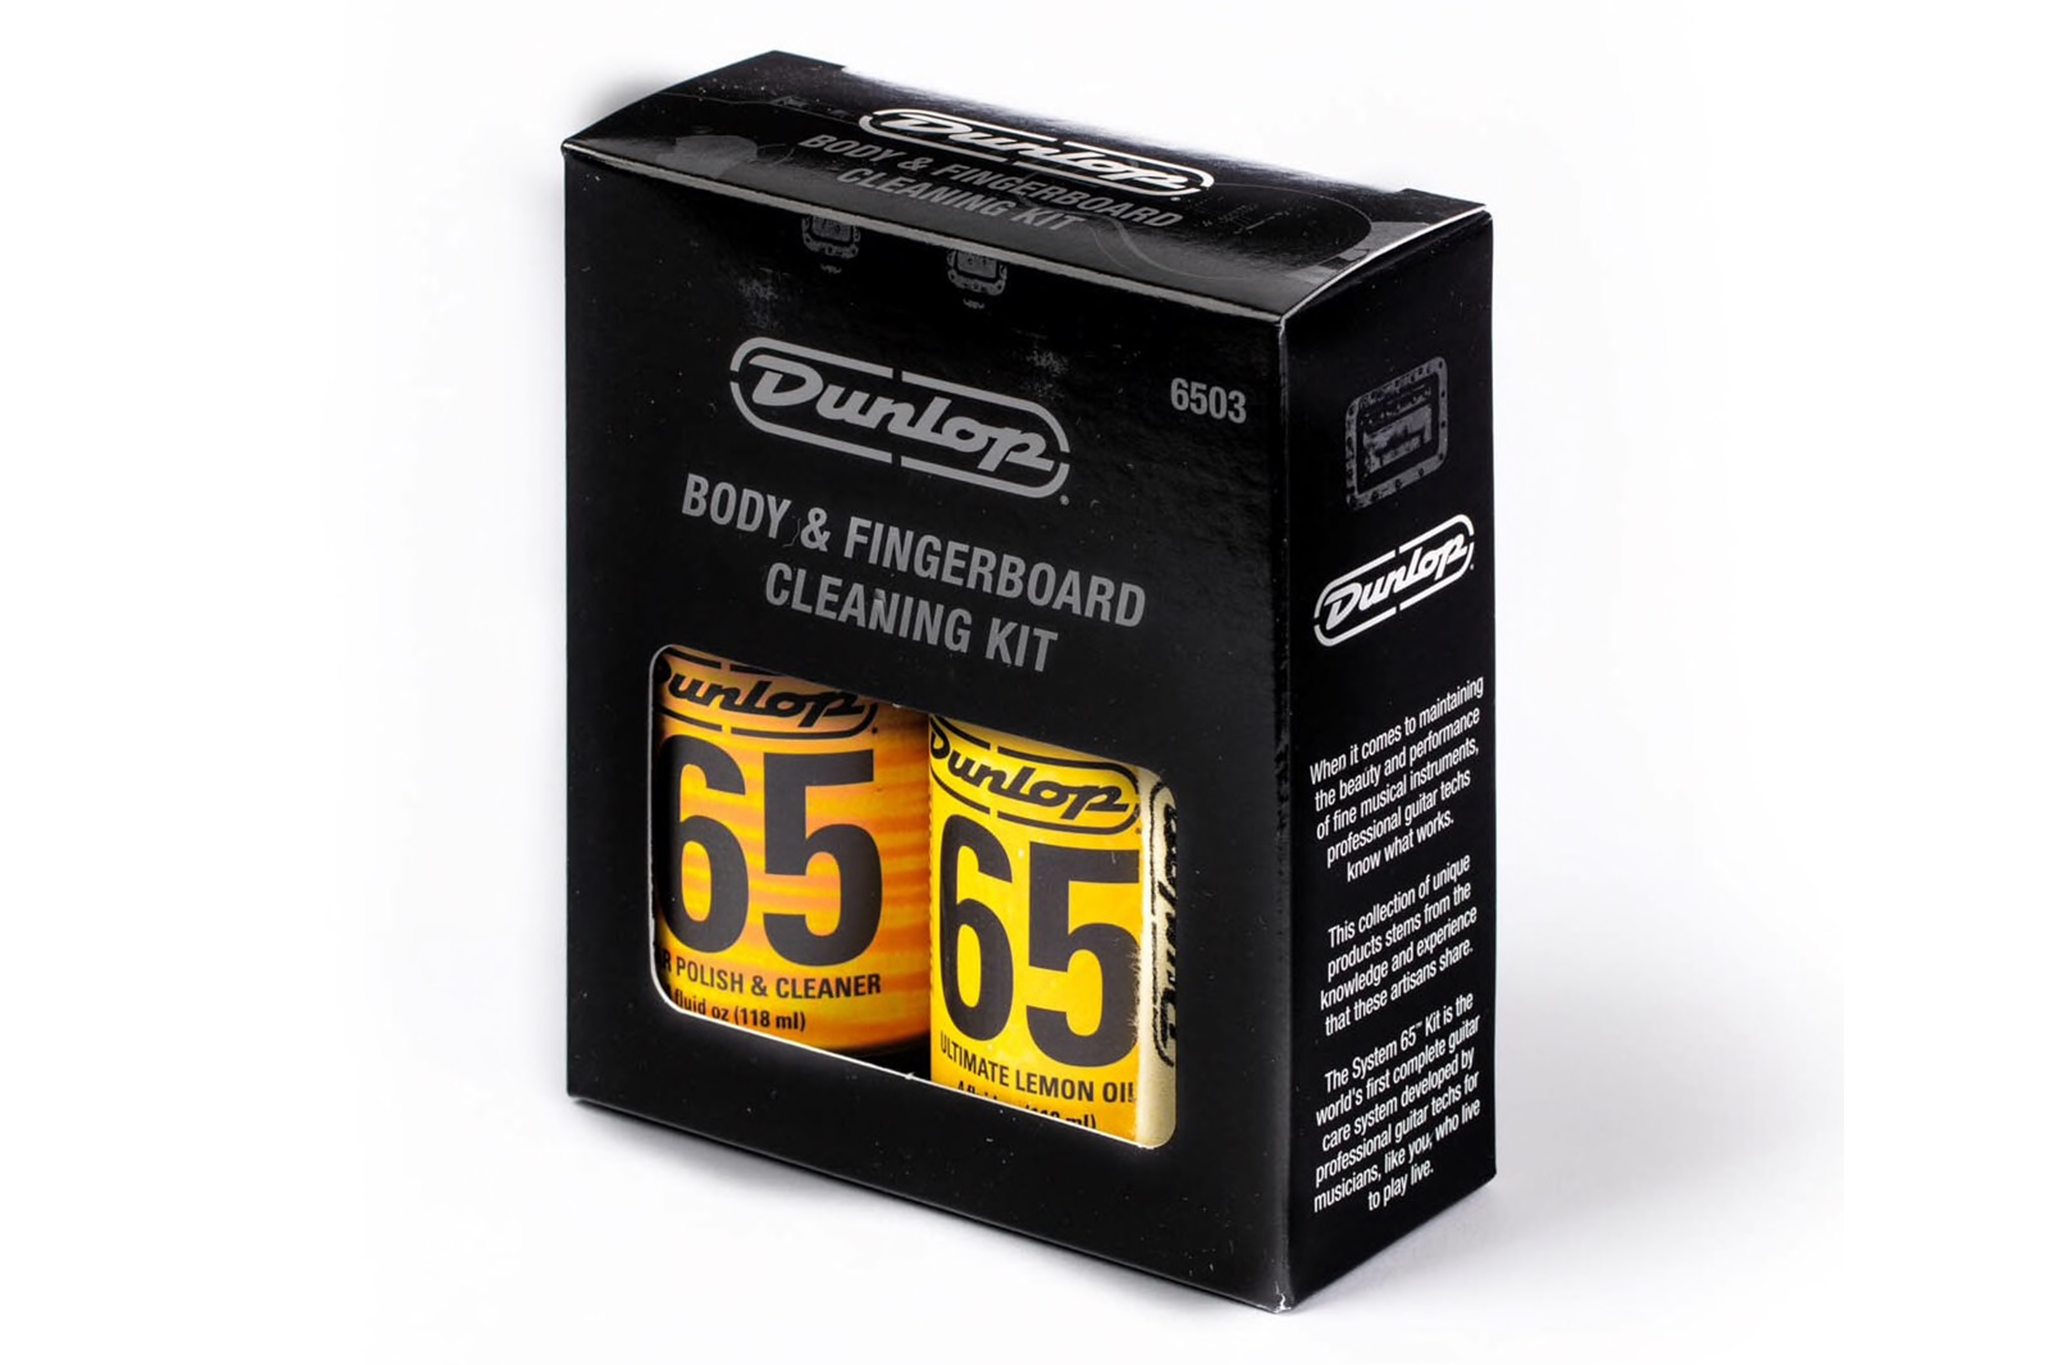 Dunlop 6503 System 65 Body and Fingerboard Cleaning Kit